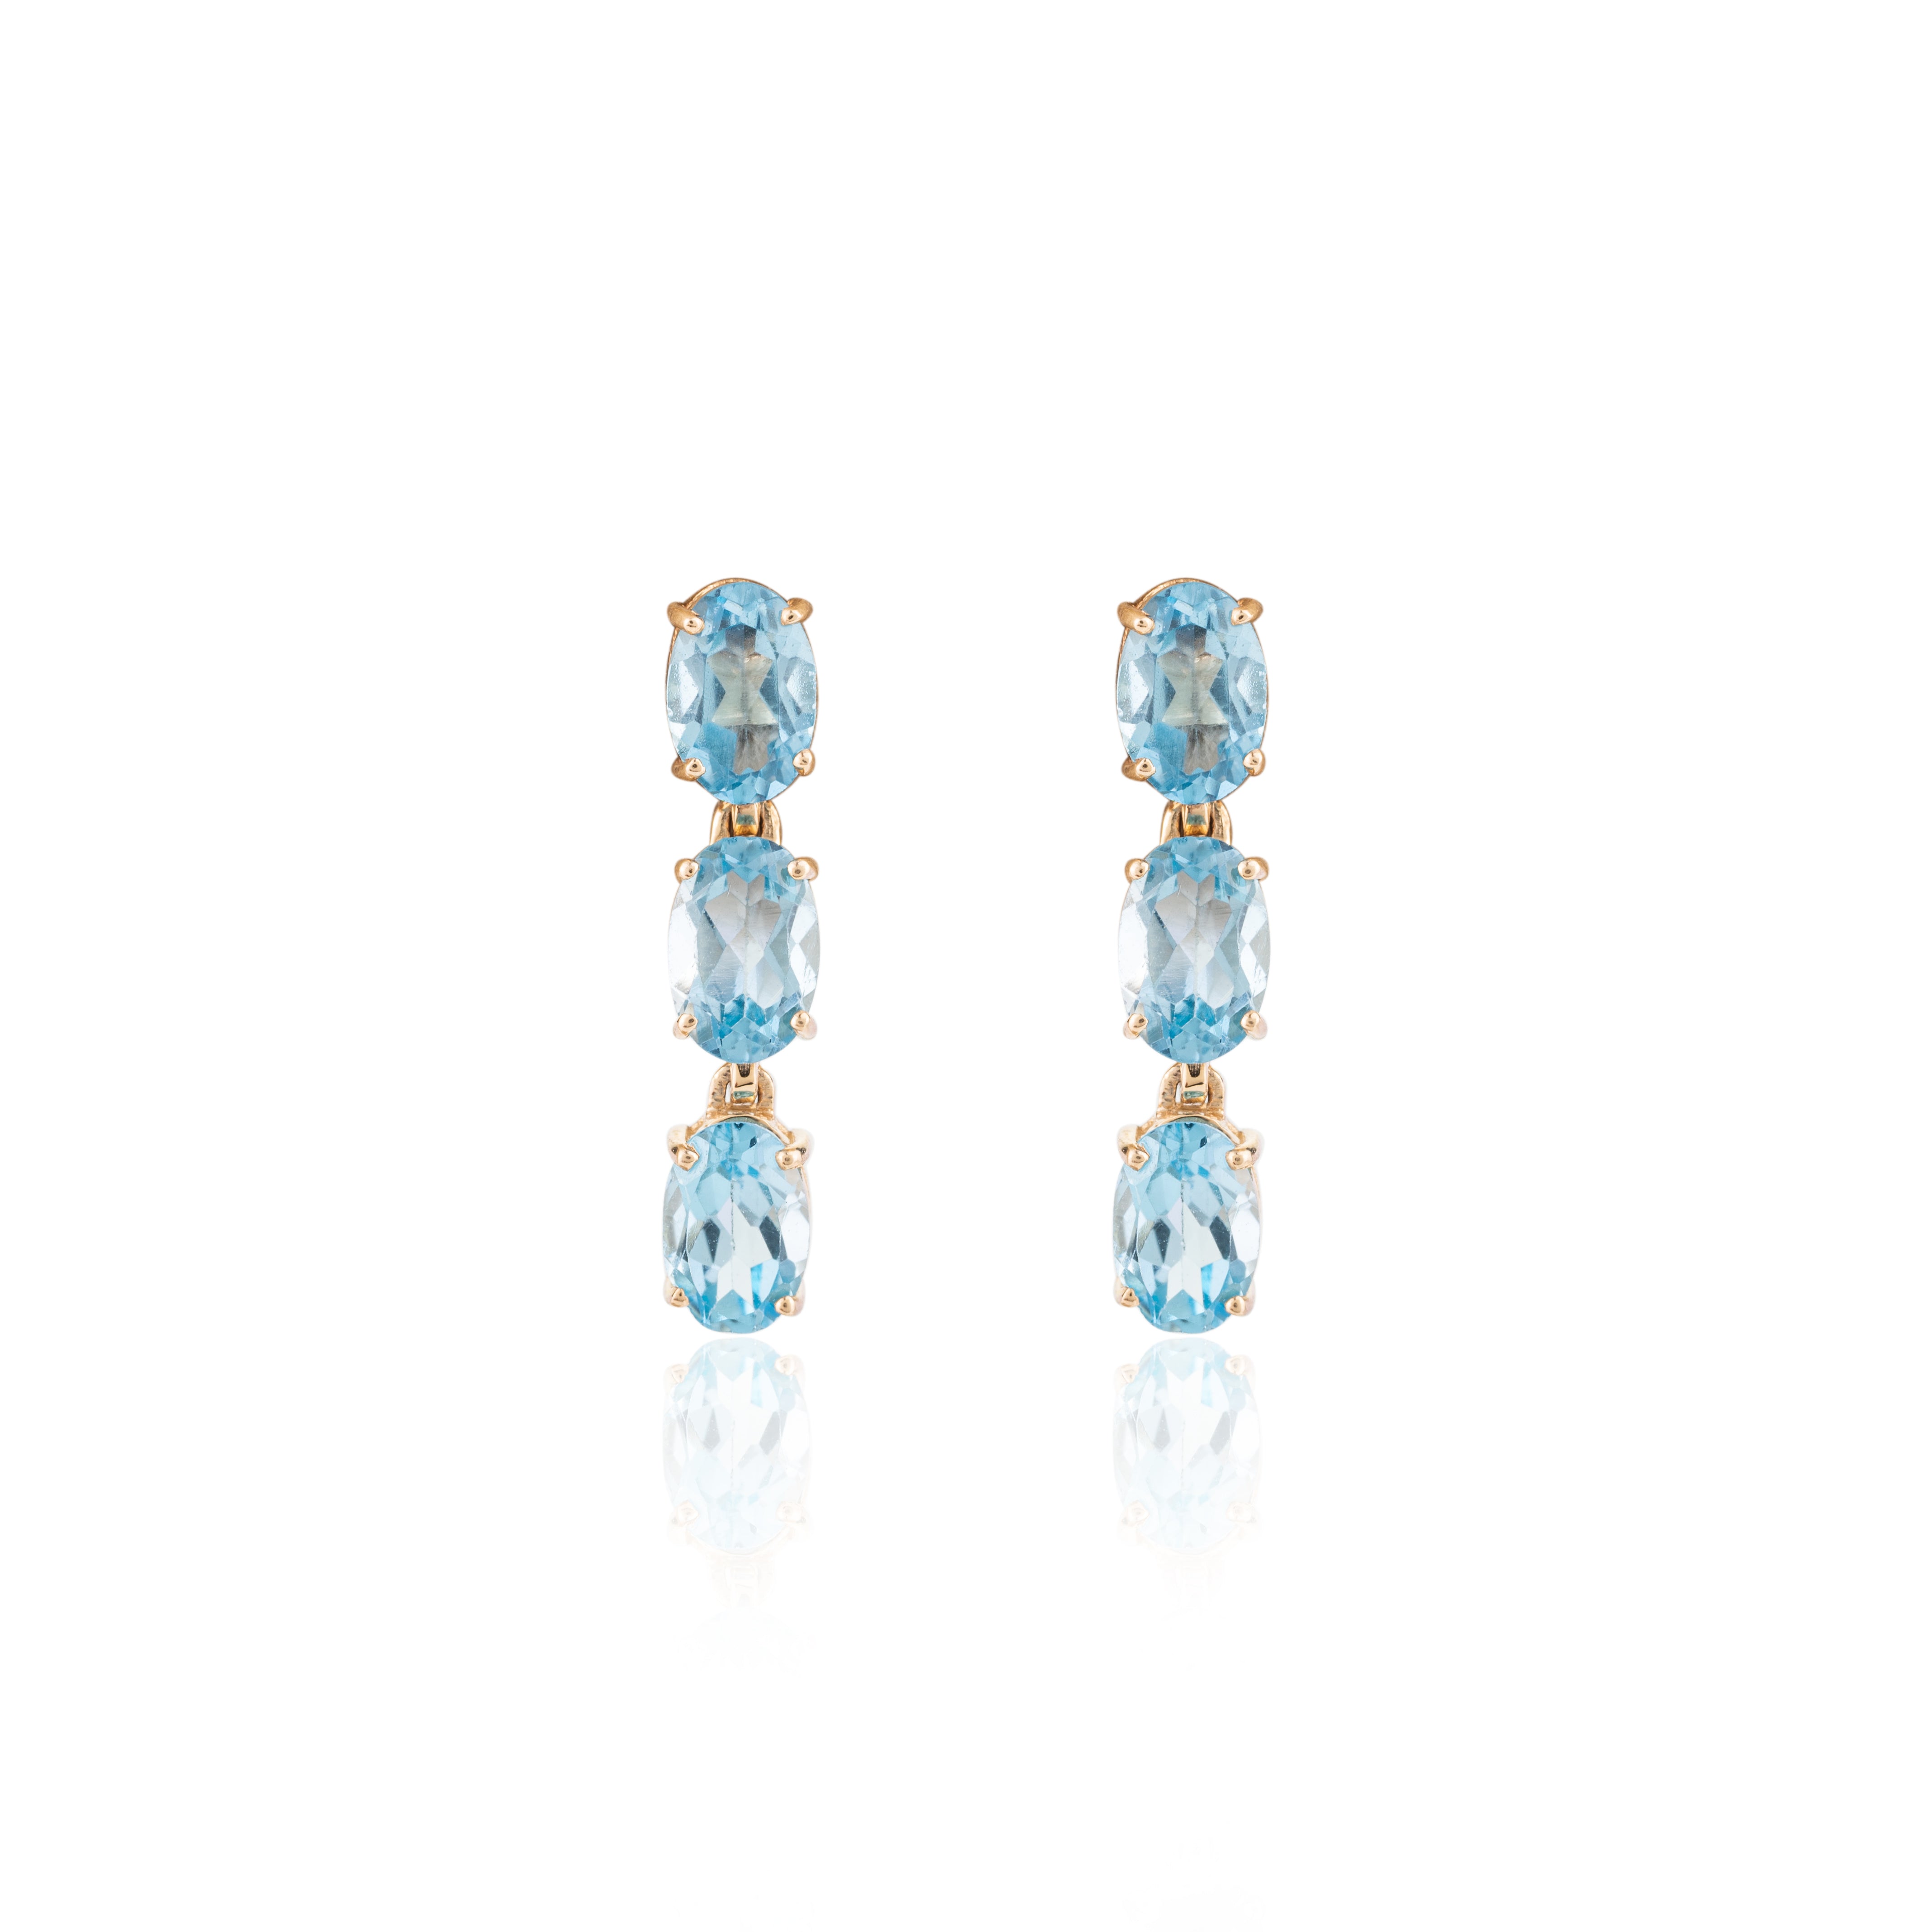 Natural Blue Topaz Gemstone Necklace and Earrings Set